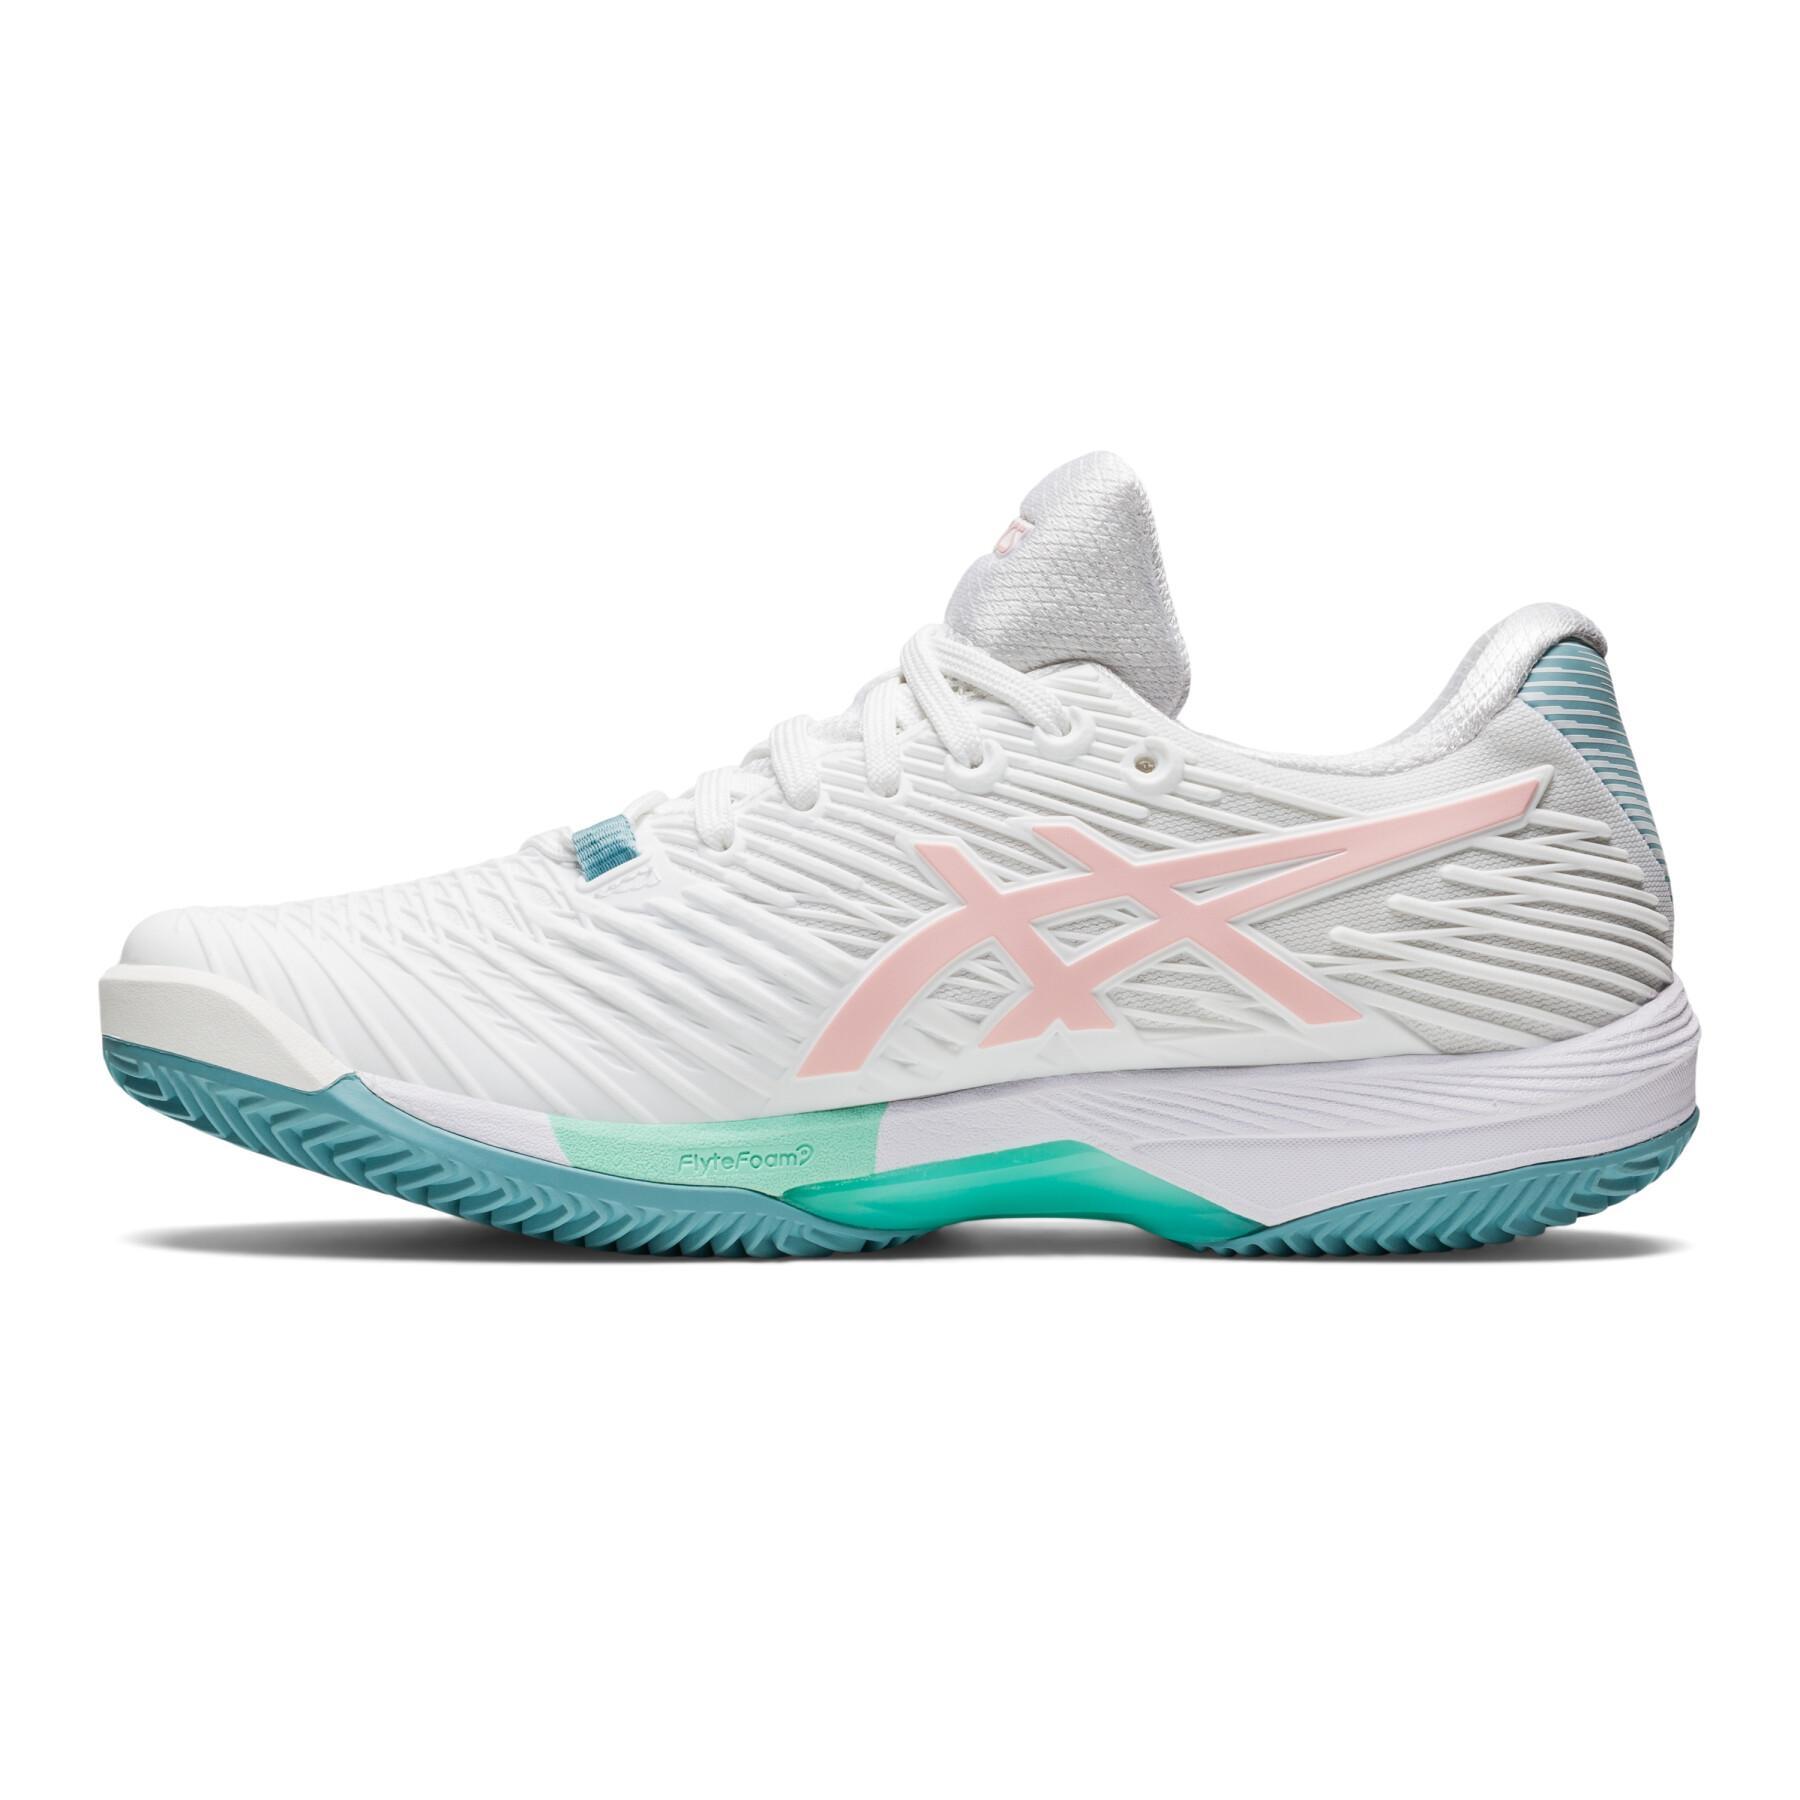 Women's tennis shoes Asics Solution speed FF 2 clay